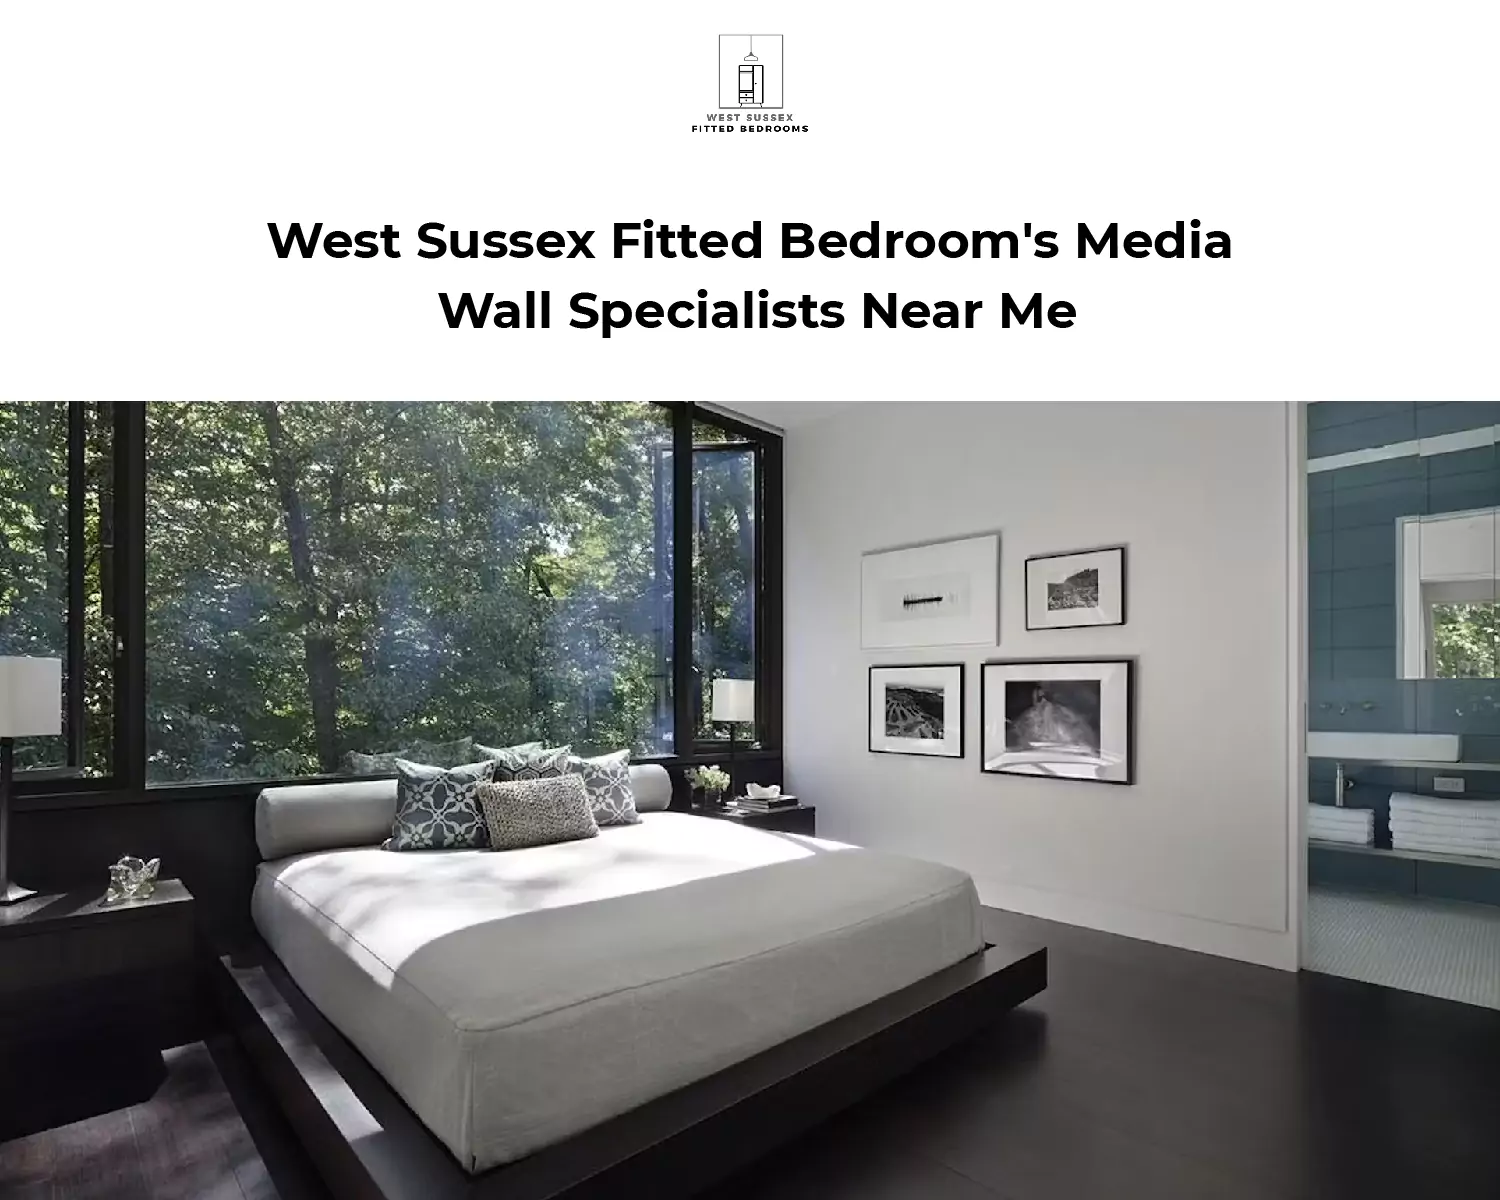 West Sussex Fitted Bedroom's Media Wall Specialists Near Me